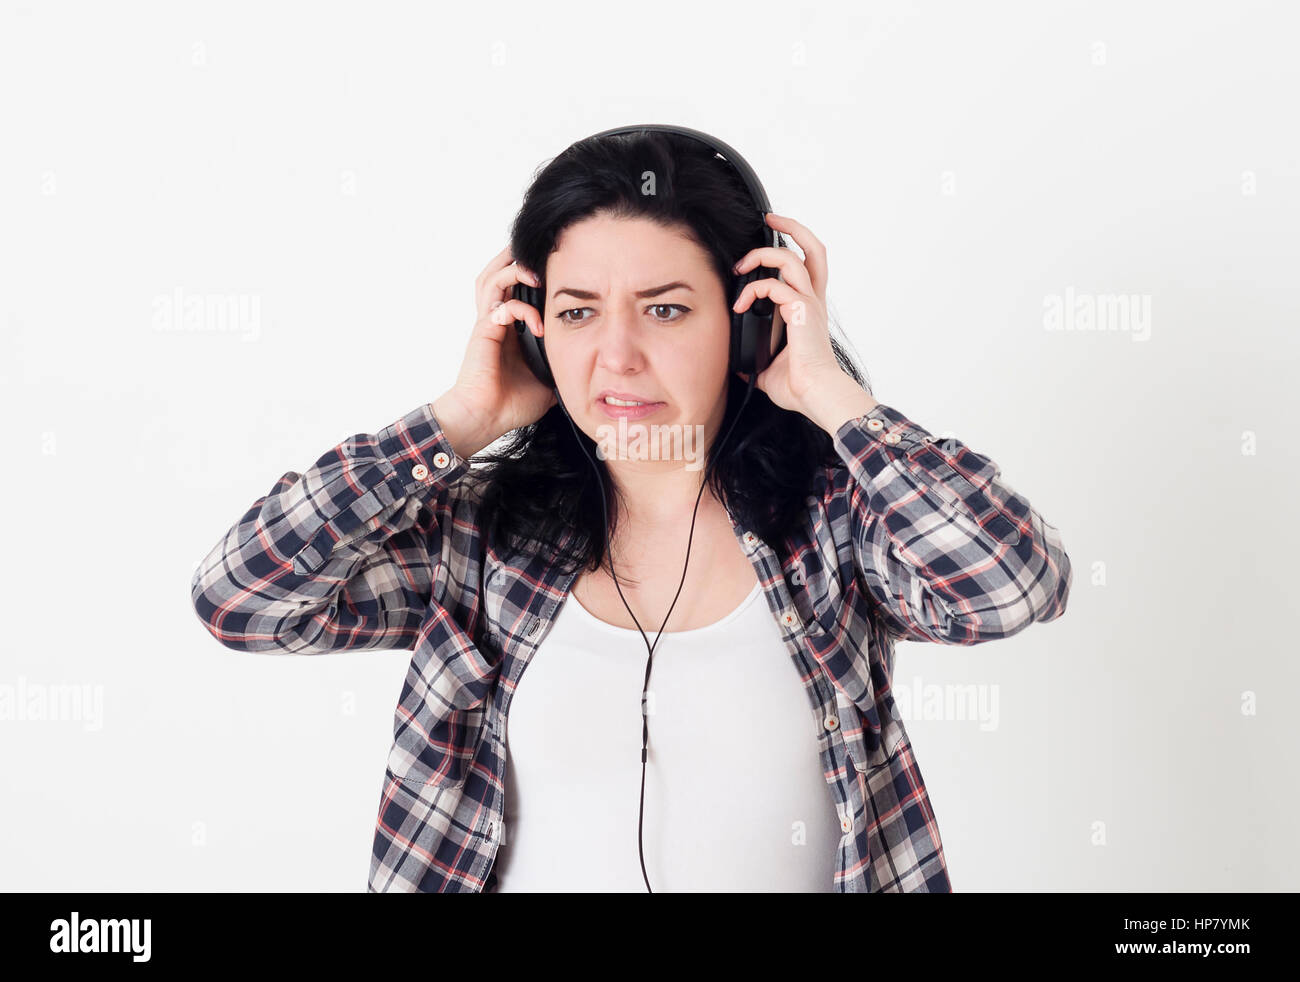 Woman heard a very bad music or unpleasant noise in the headphones, she twisted face and wants to remove the headphones from the head. Stock Photo